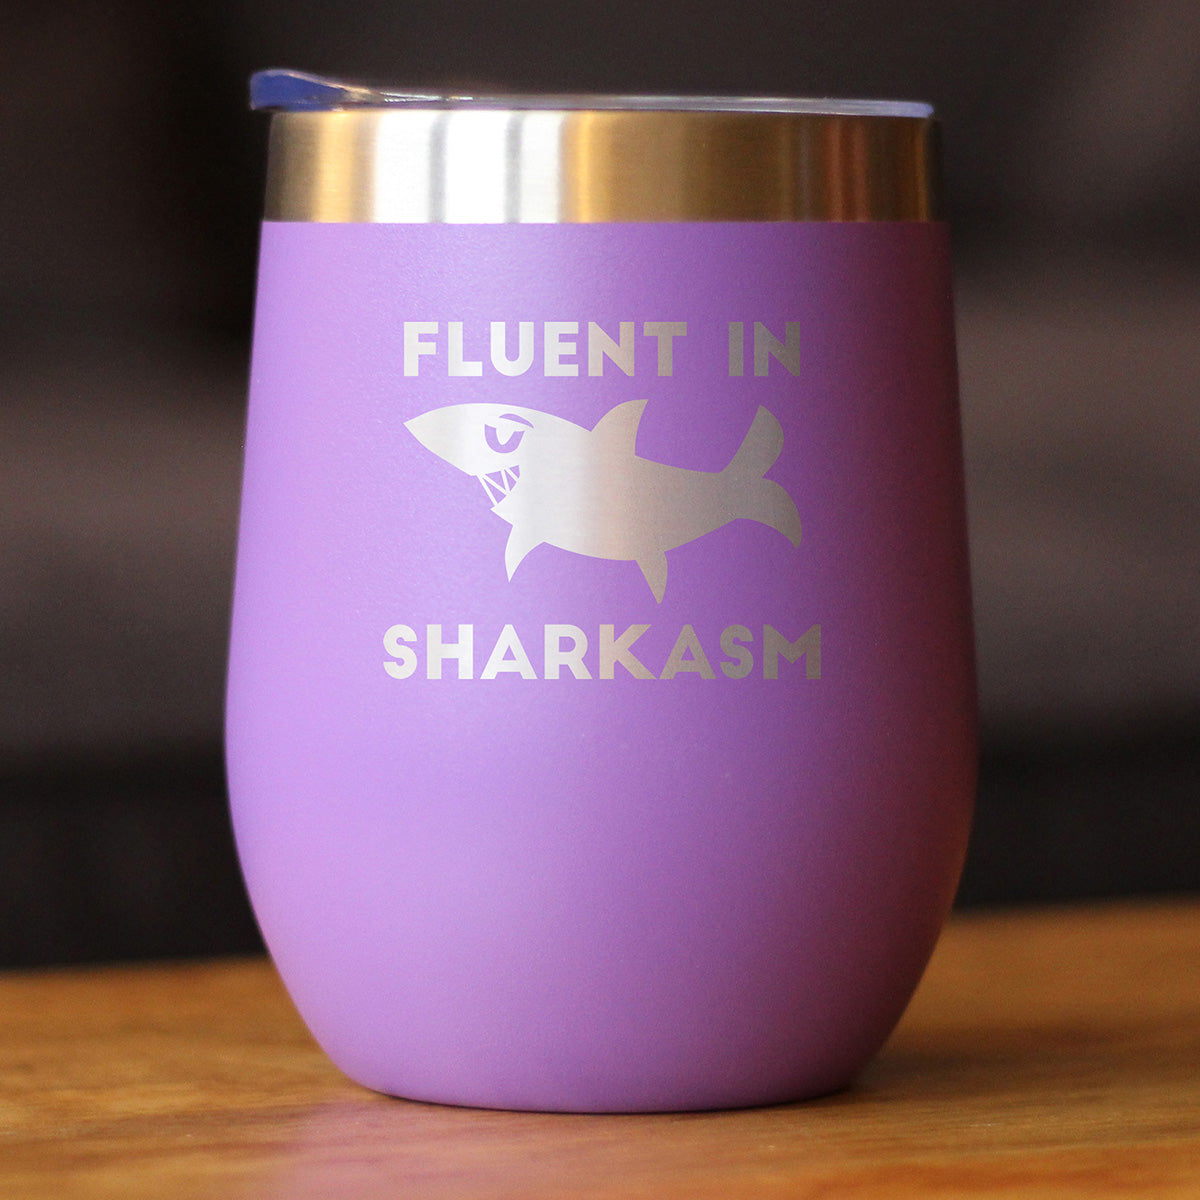 Fluent in Sharkasm - Funny Shark Wine Tumbler Glass with Sliding Lid - Stainless Steel Insulated Mug - Cute Shark Decor Gifts